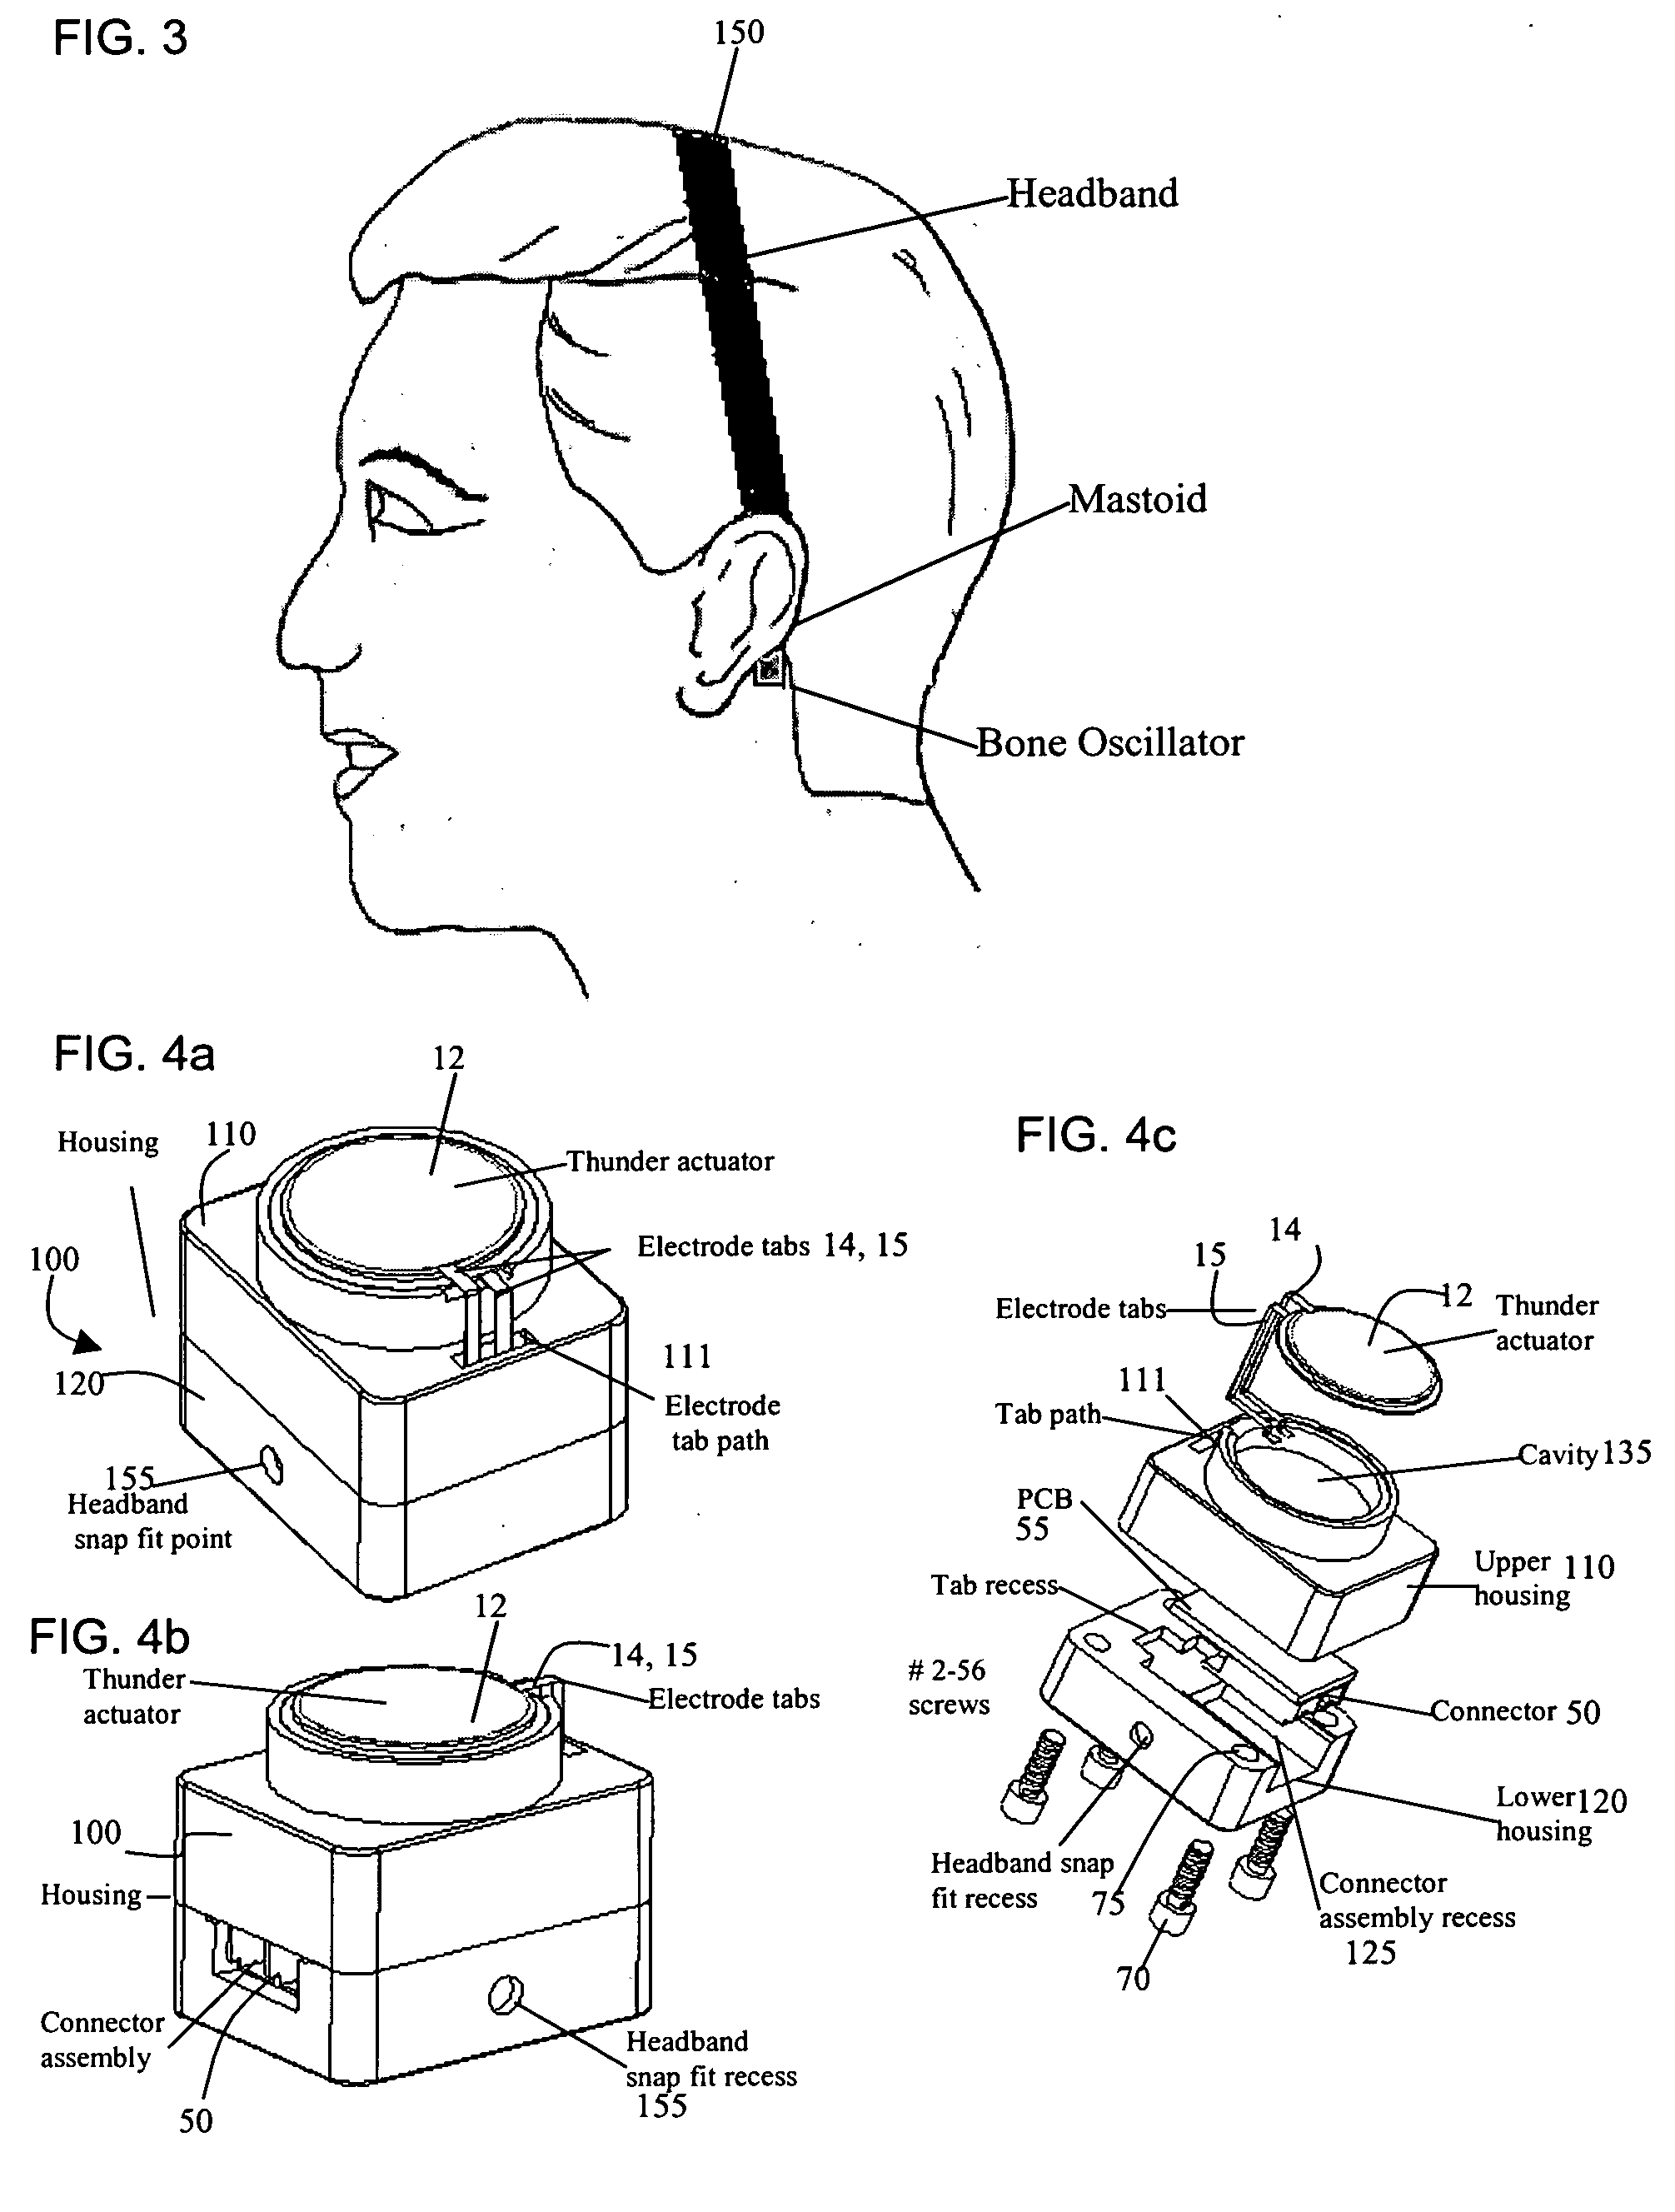 Bone-conduction hearing-aid transducer having improved frequency response